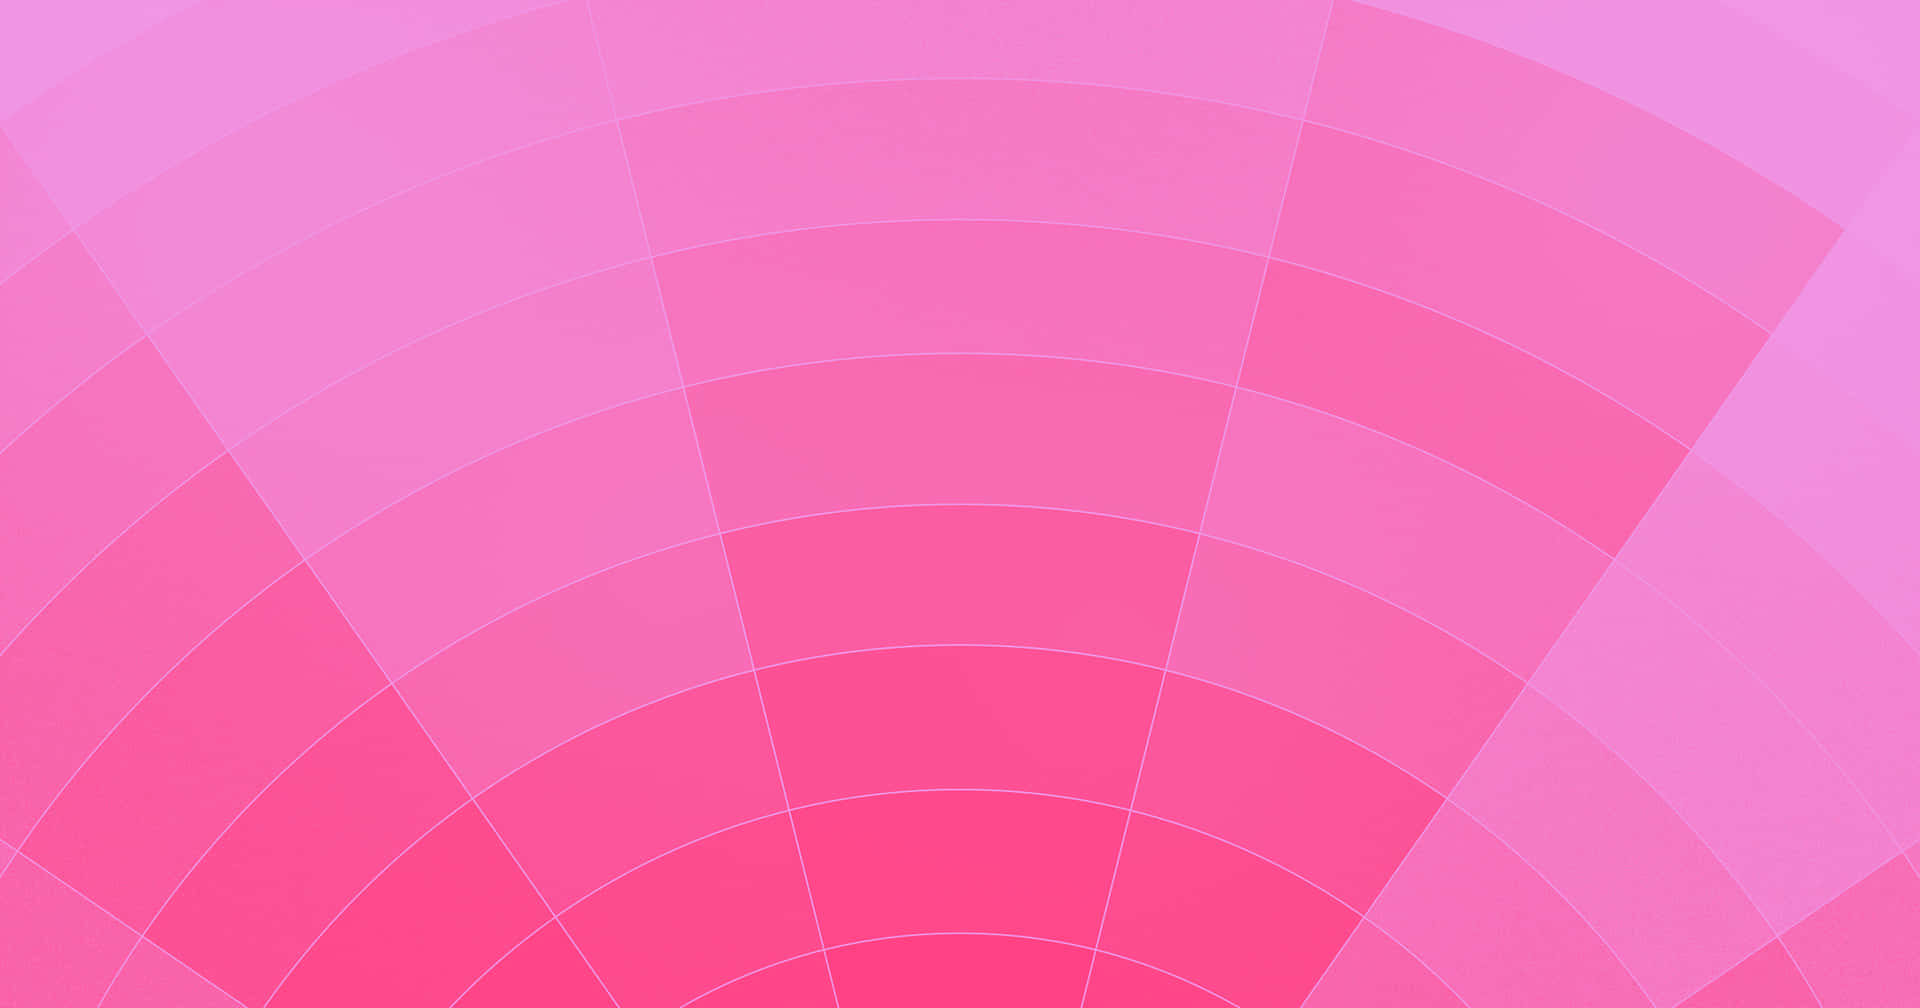 Solid pink background